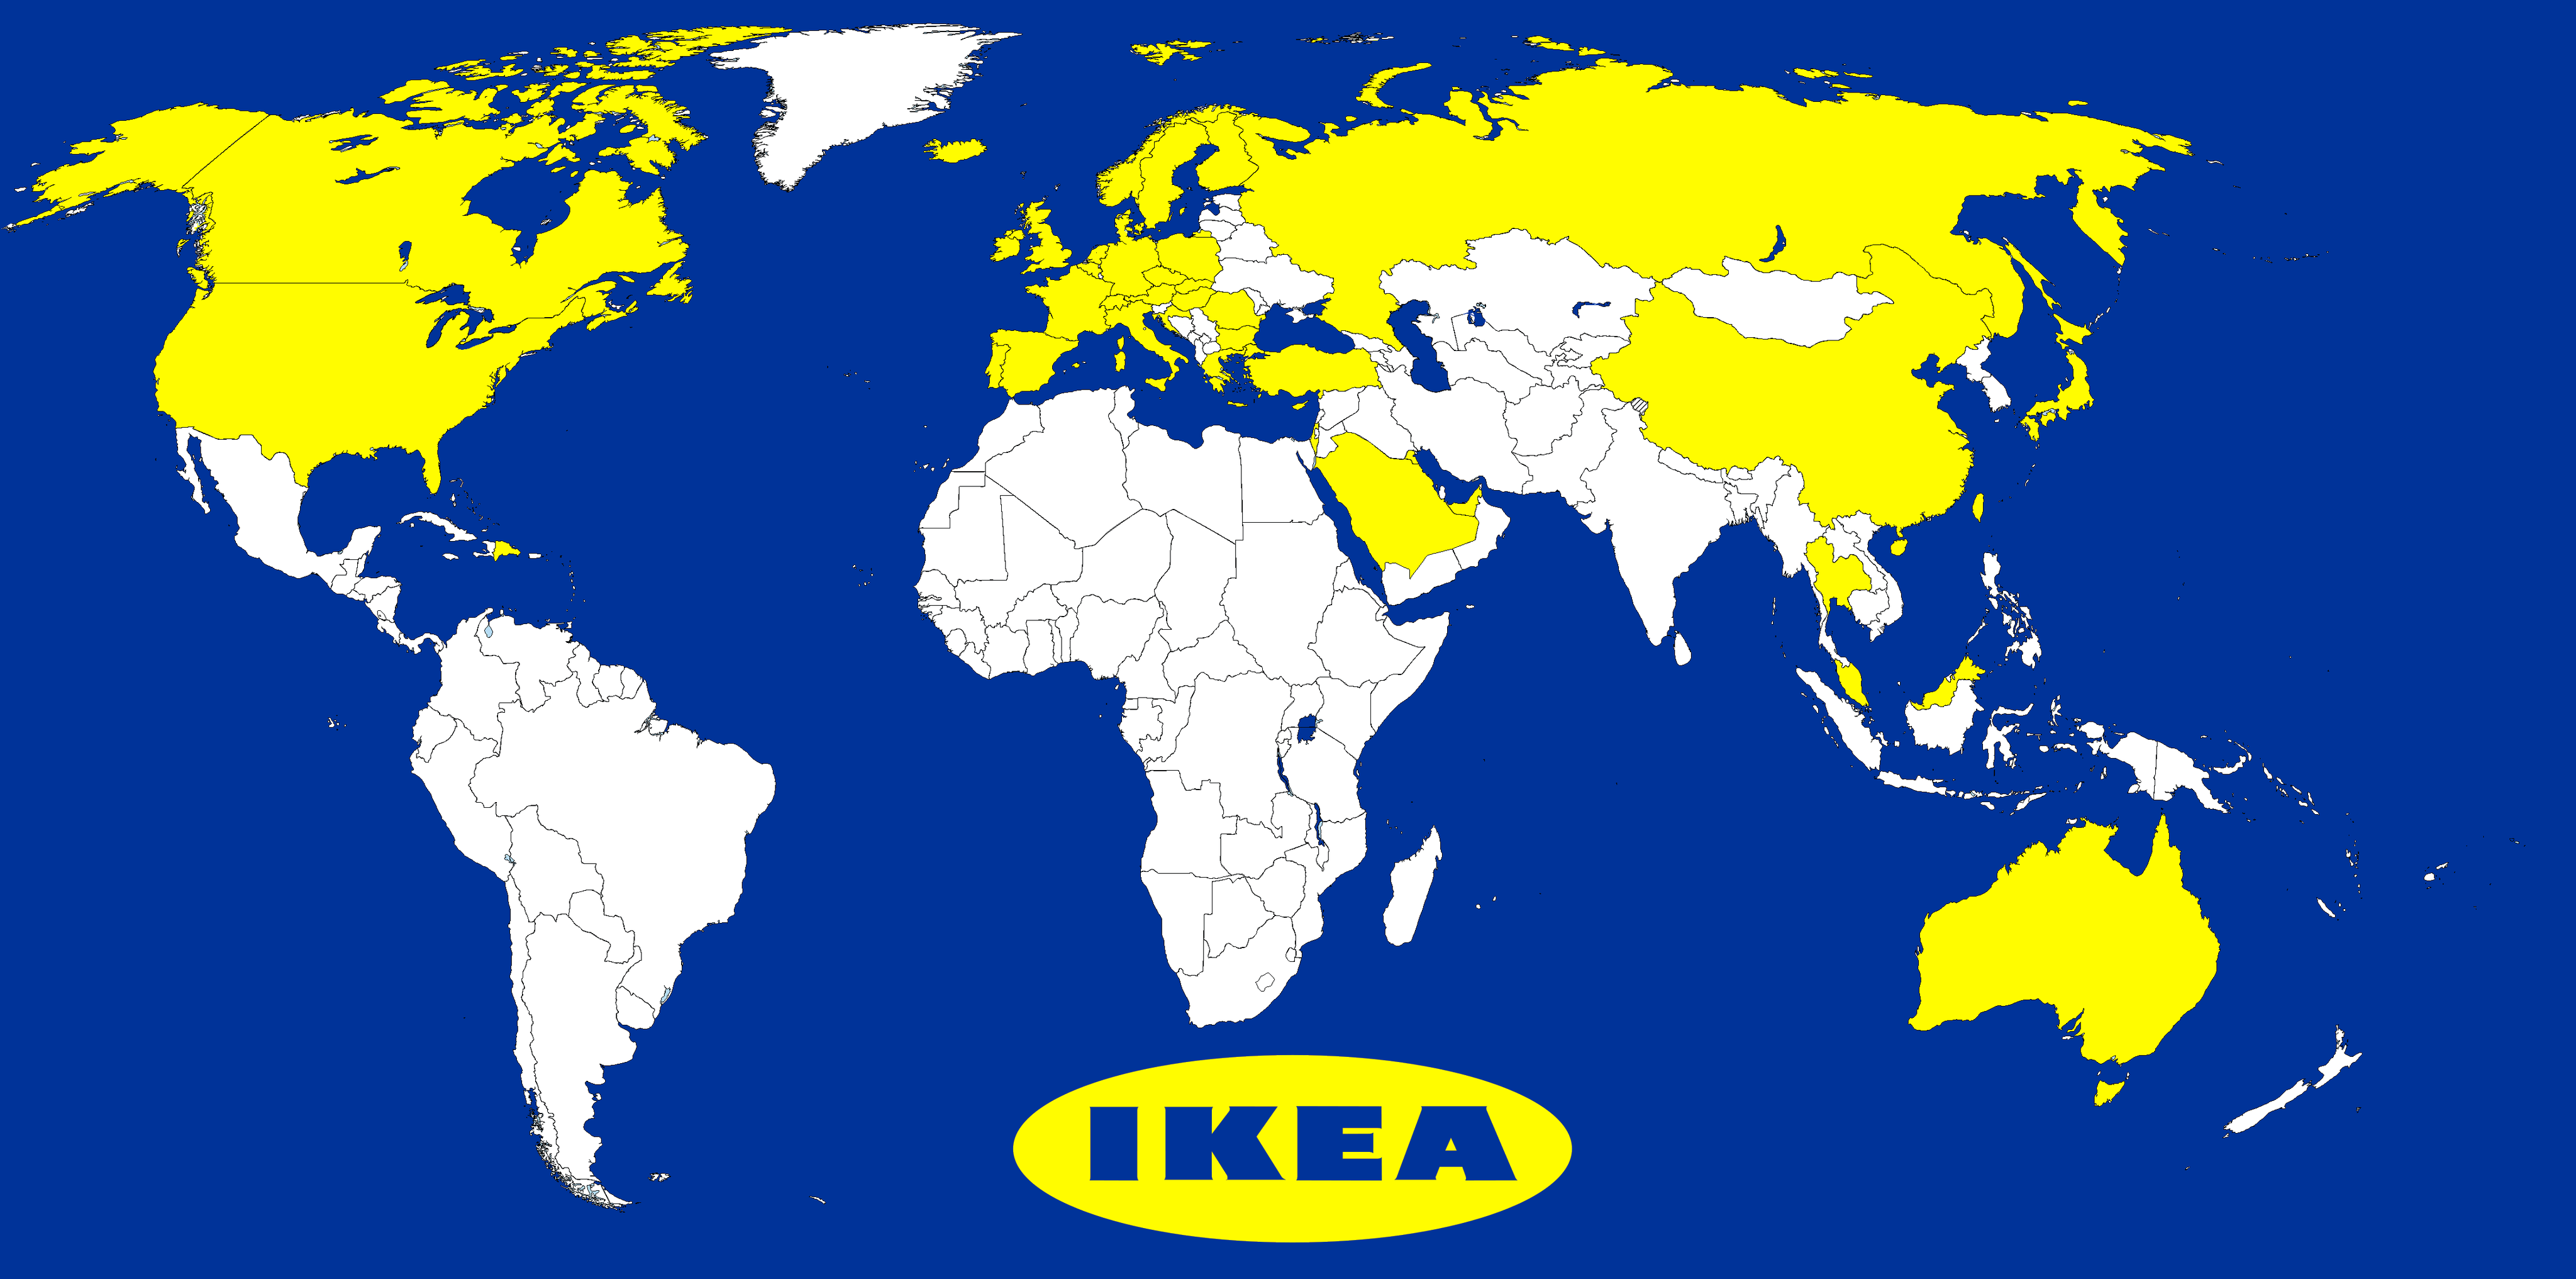 IKEA's localization methods have been hugely successful all over the world